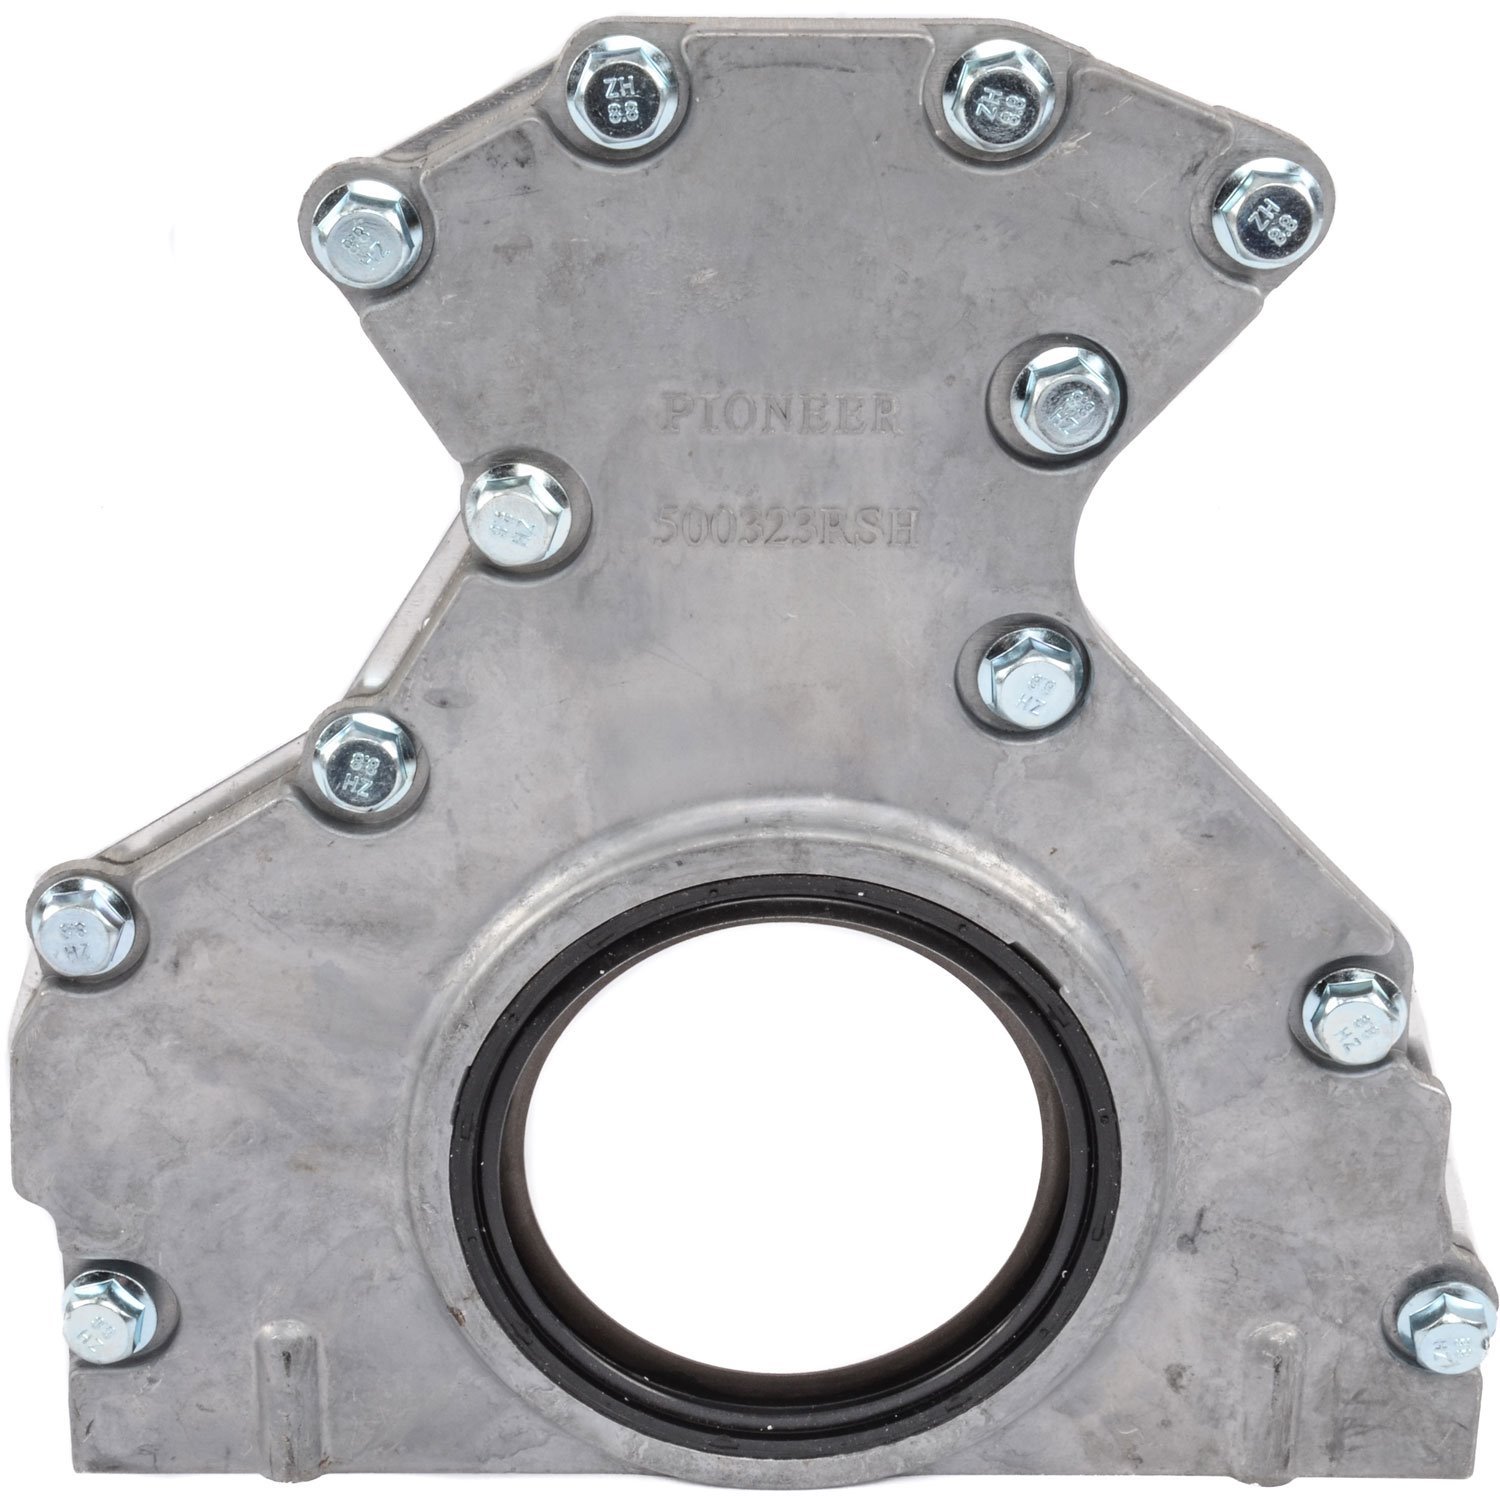 GM LS Rear Main Seal Cover for GM LS Series Engines